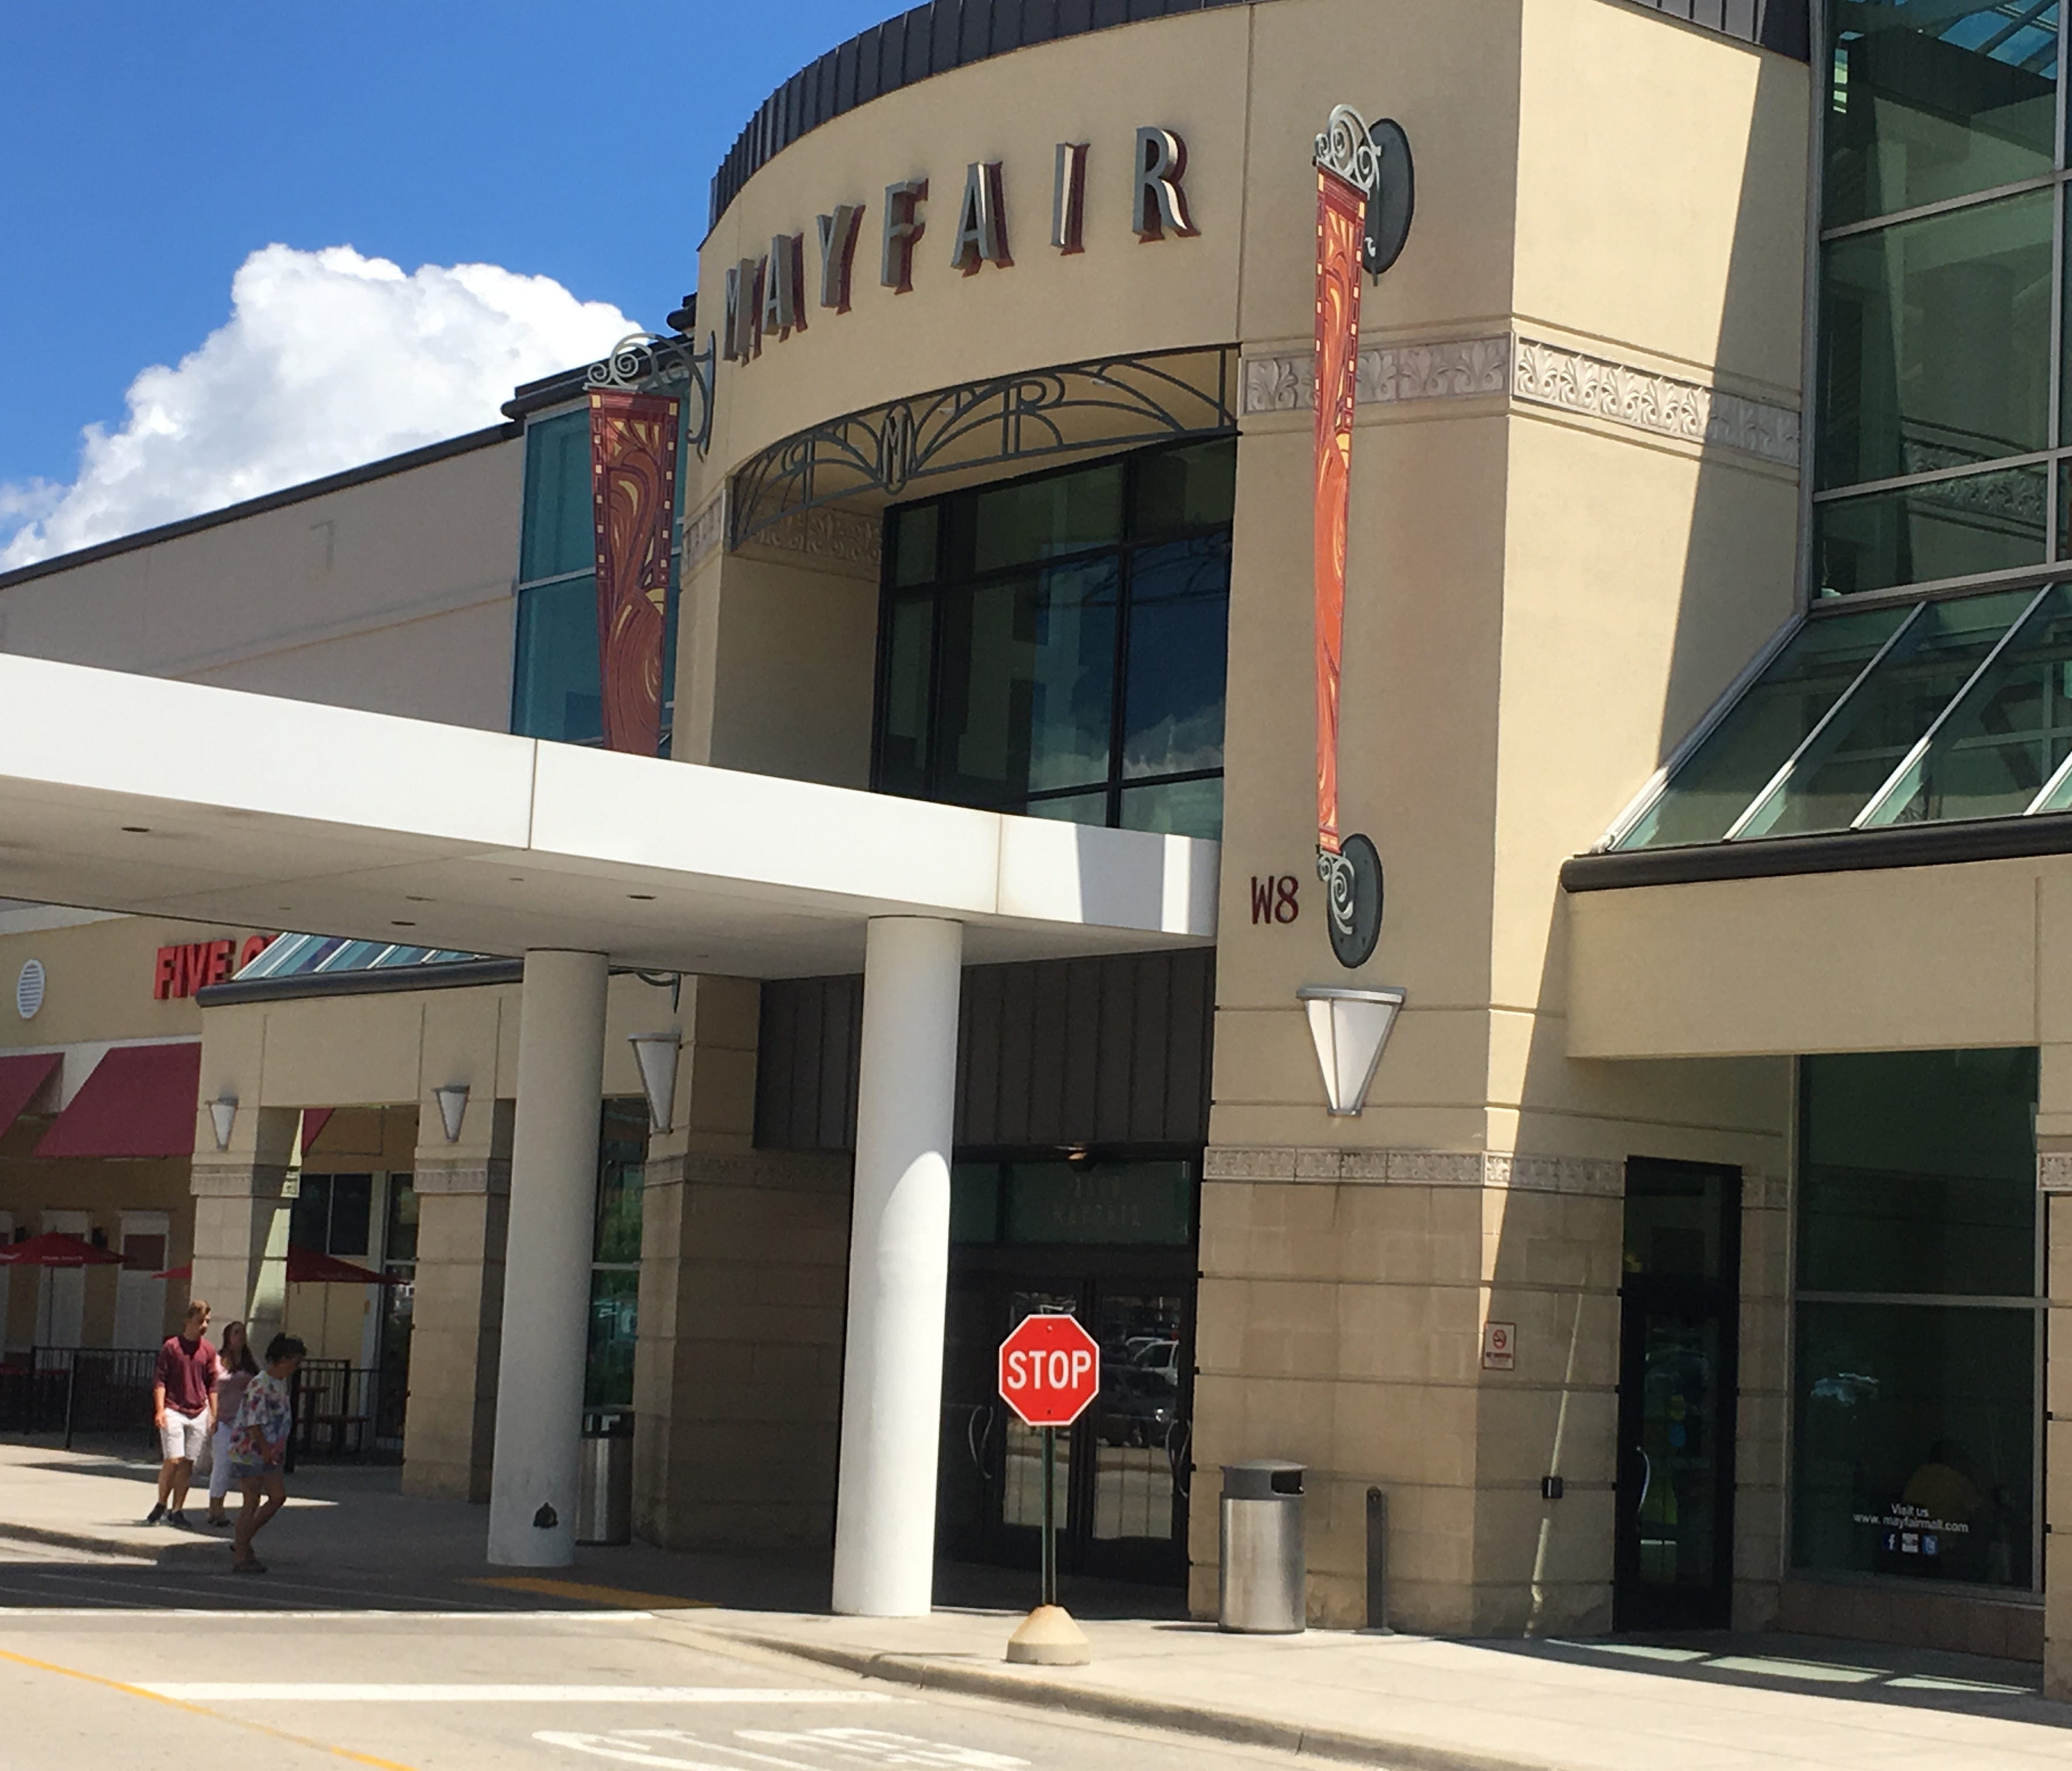 Retailer Vans is coming to Mayfair mall in Wauwatosa this August.